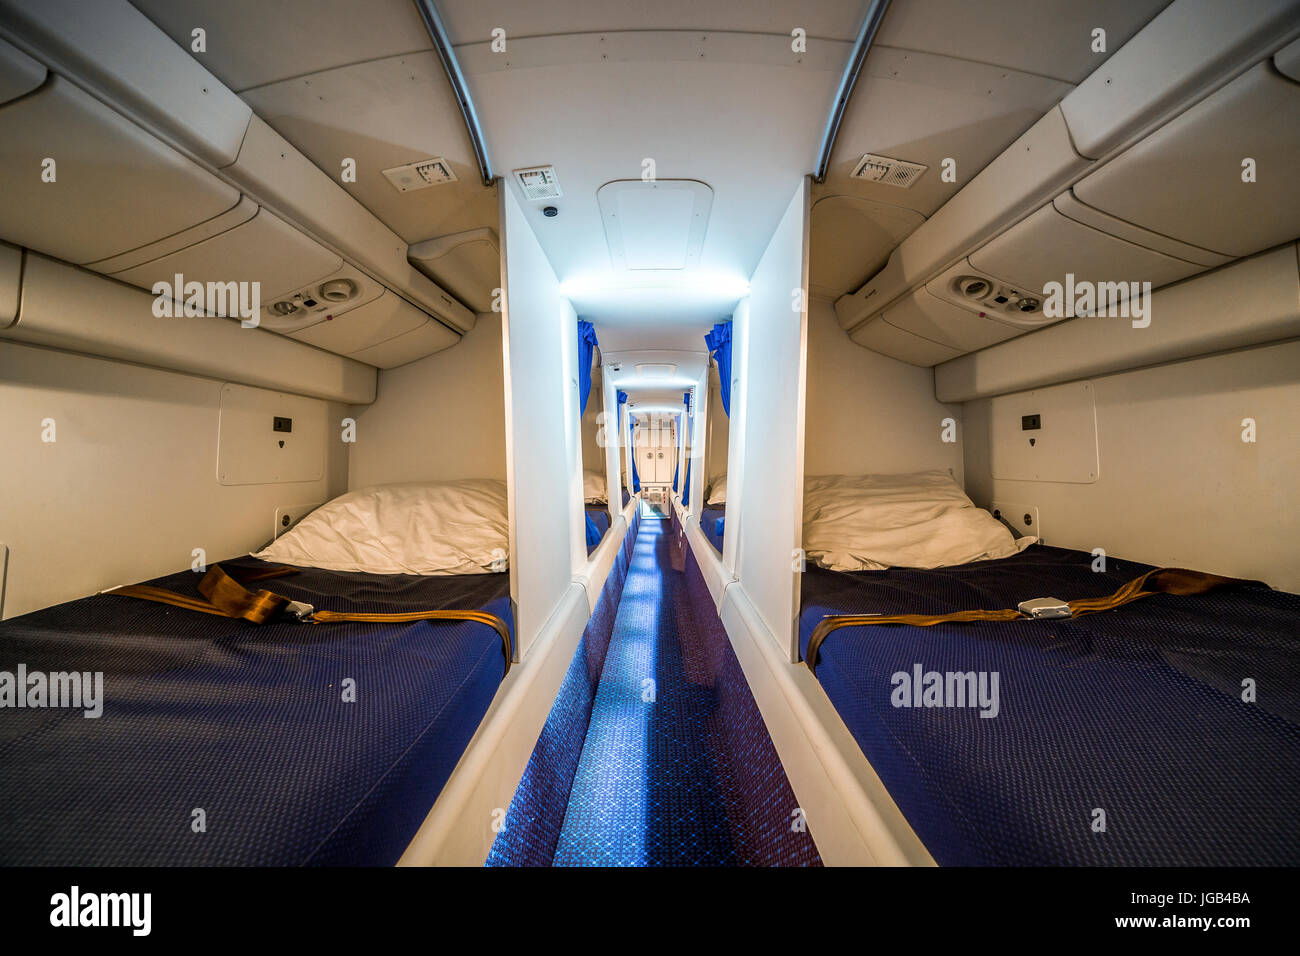 Luxury cabin for airplane crew that enables them to rest and sleep during flight Stock Photo